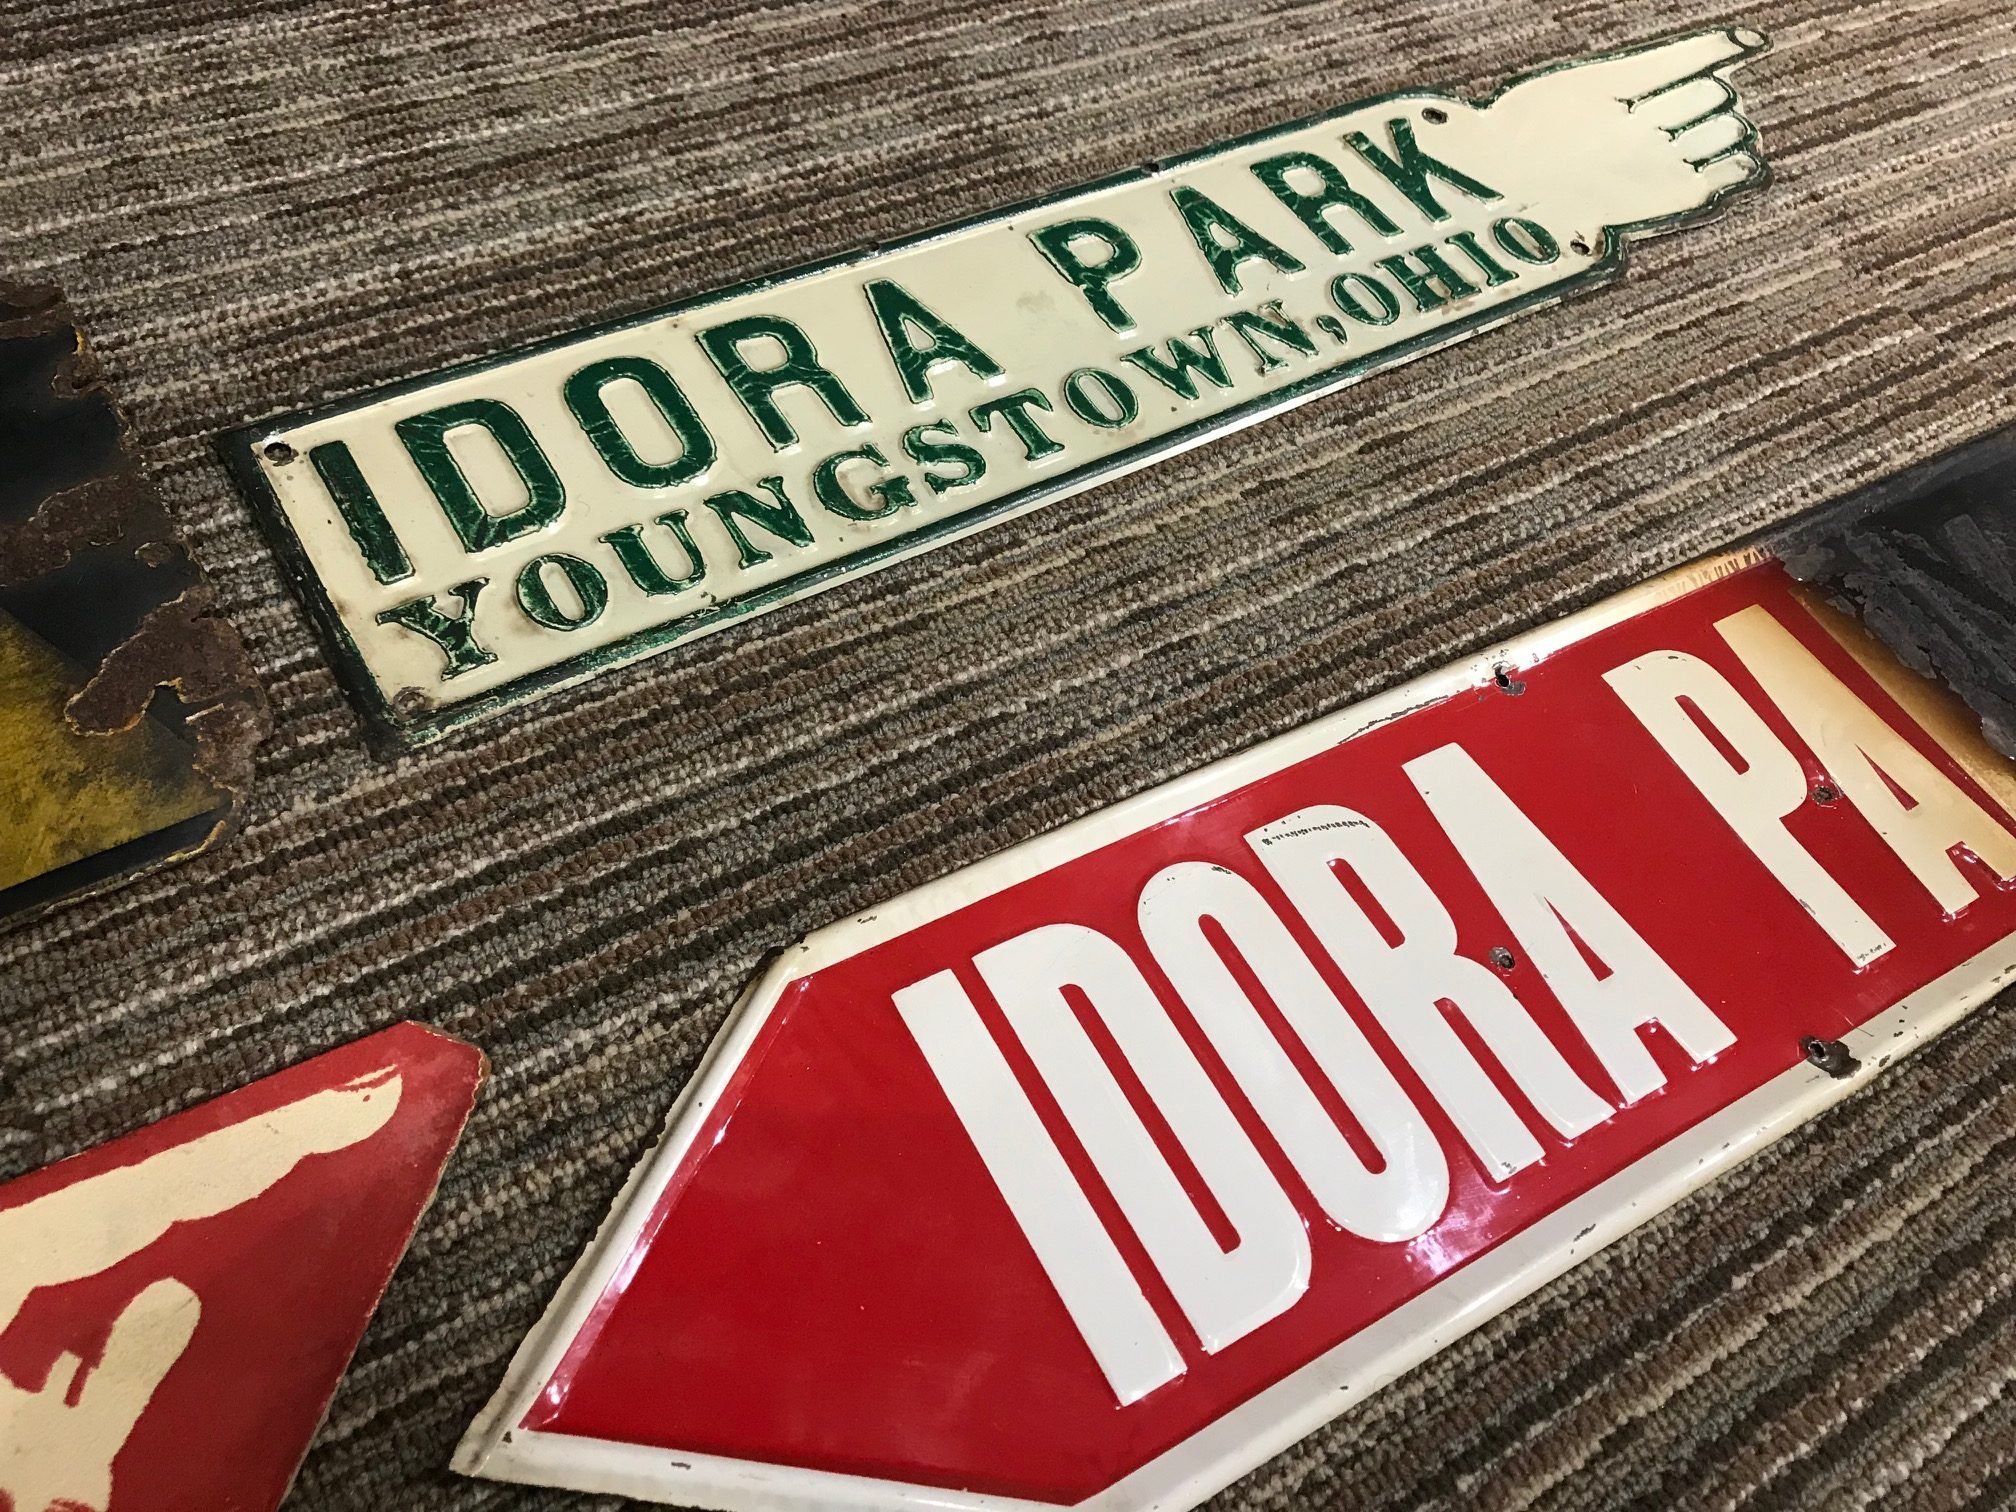 The Idora Park Experience in Canfield, Ohio preserves a collection of ride cars, signage, and other artifacts.